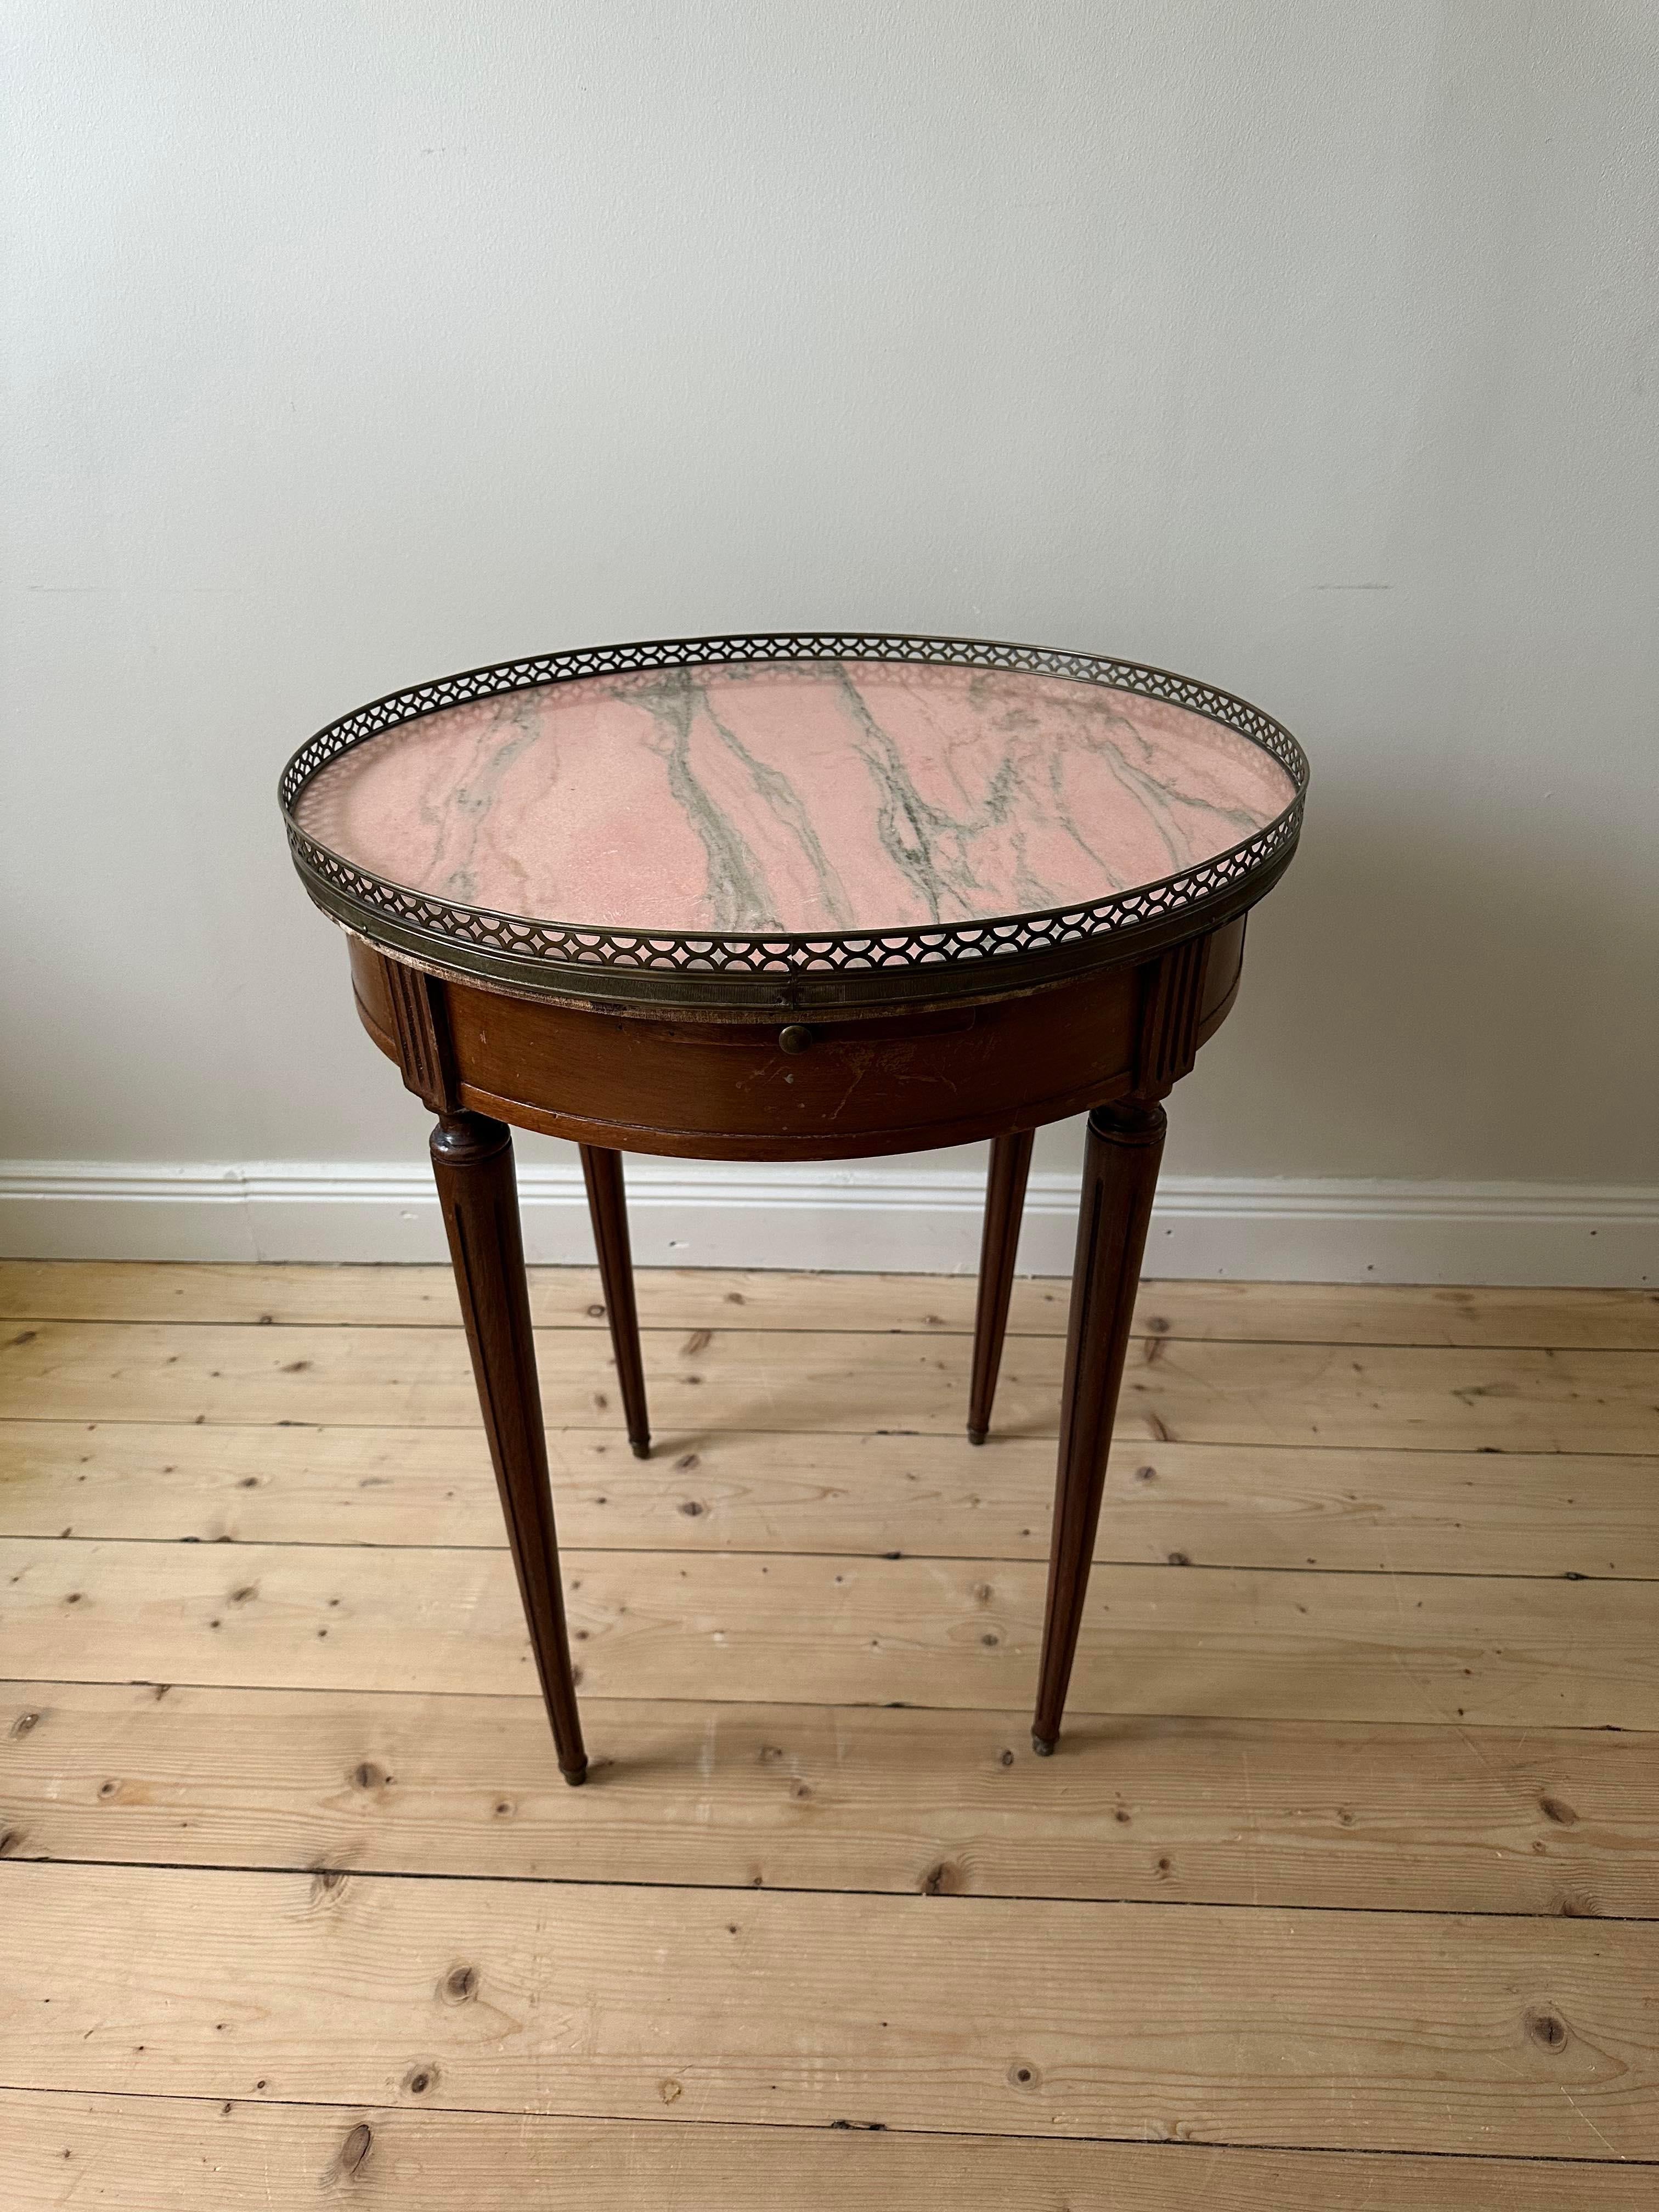 Beautiful round side table in 